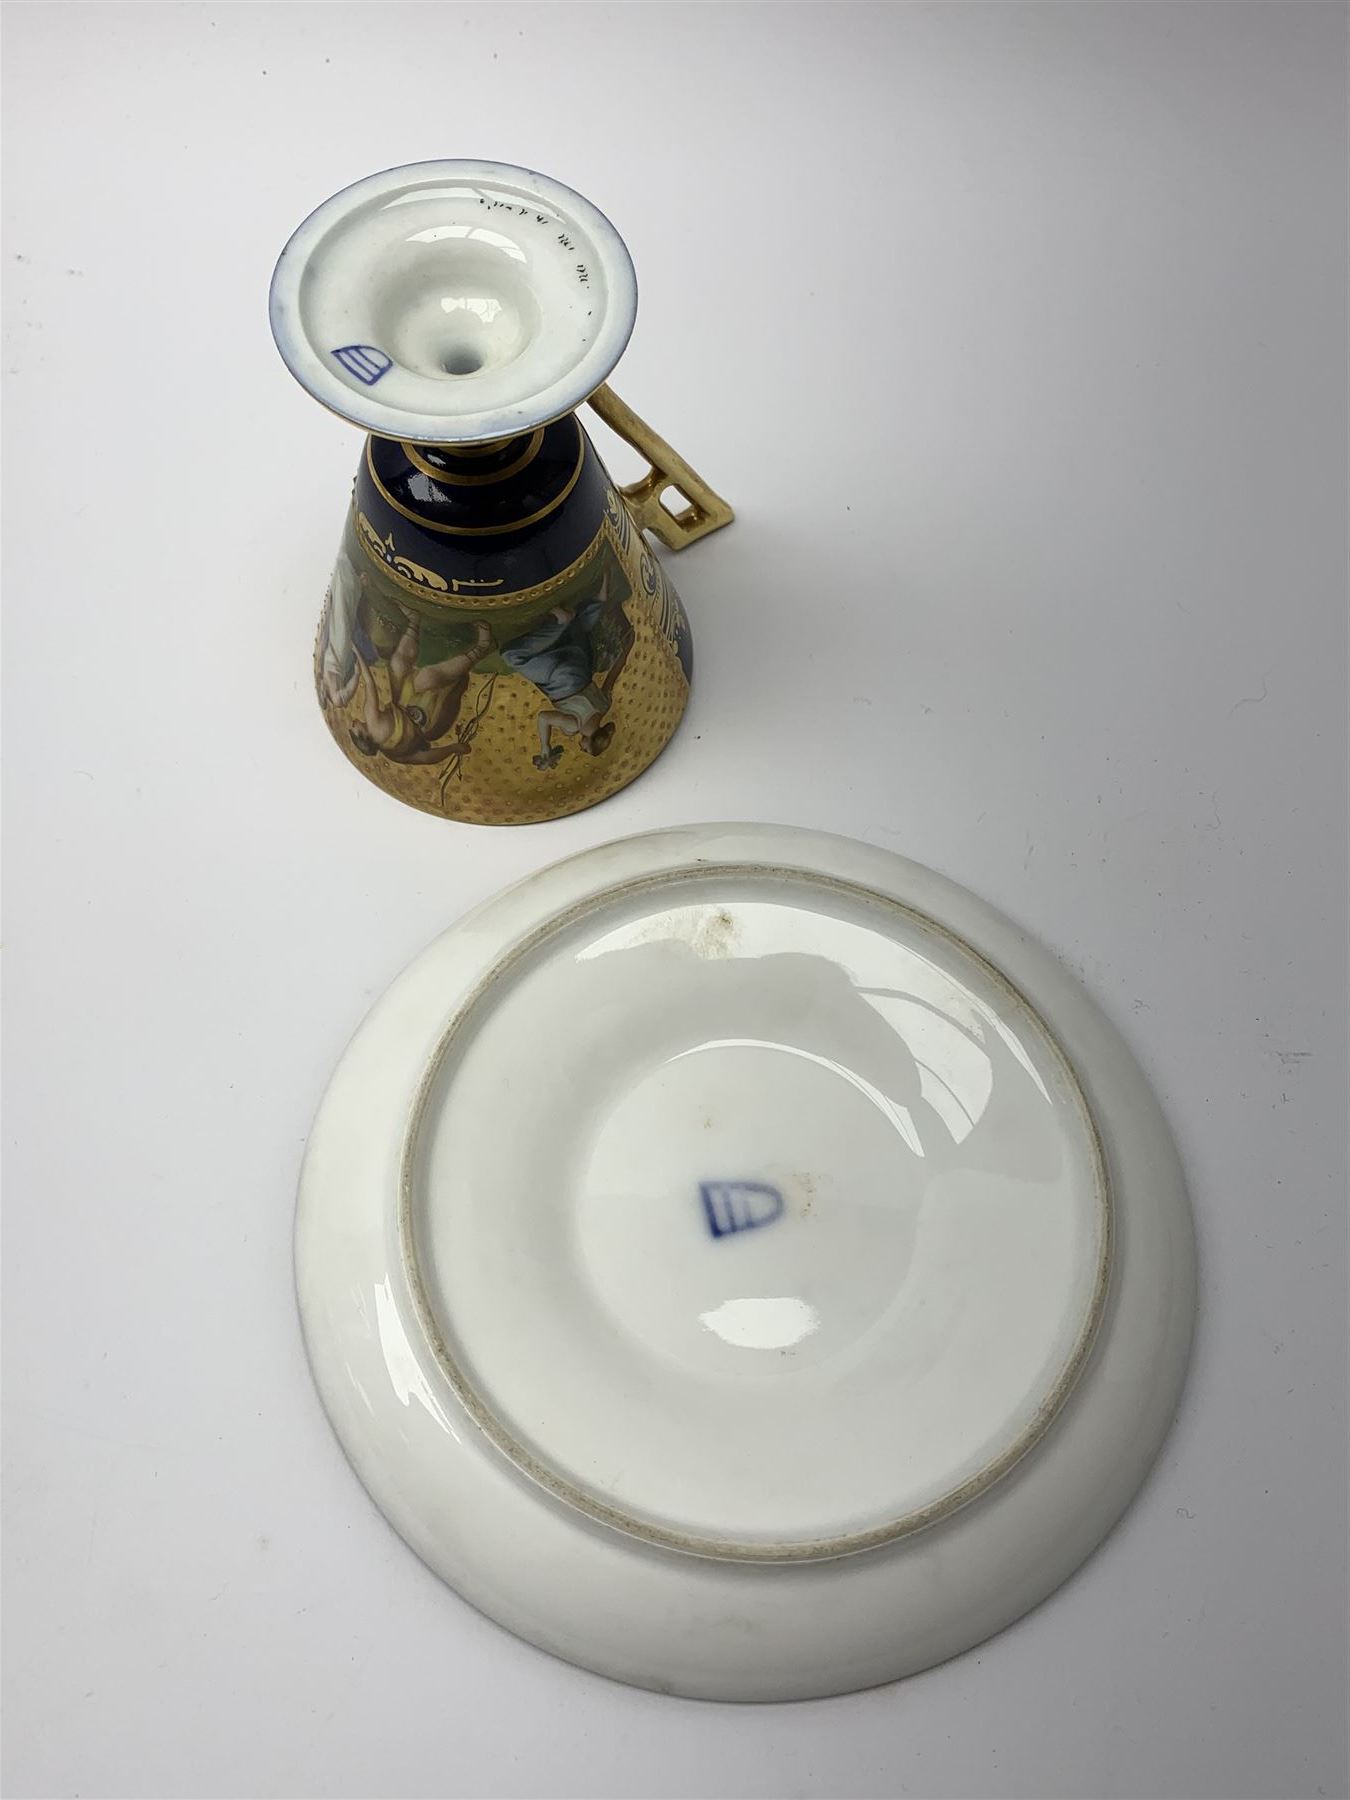 Vienna cabinet cup and saucer - Image 9 of 9